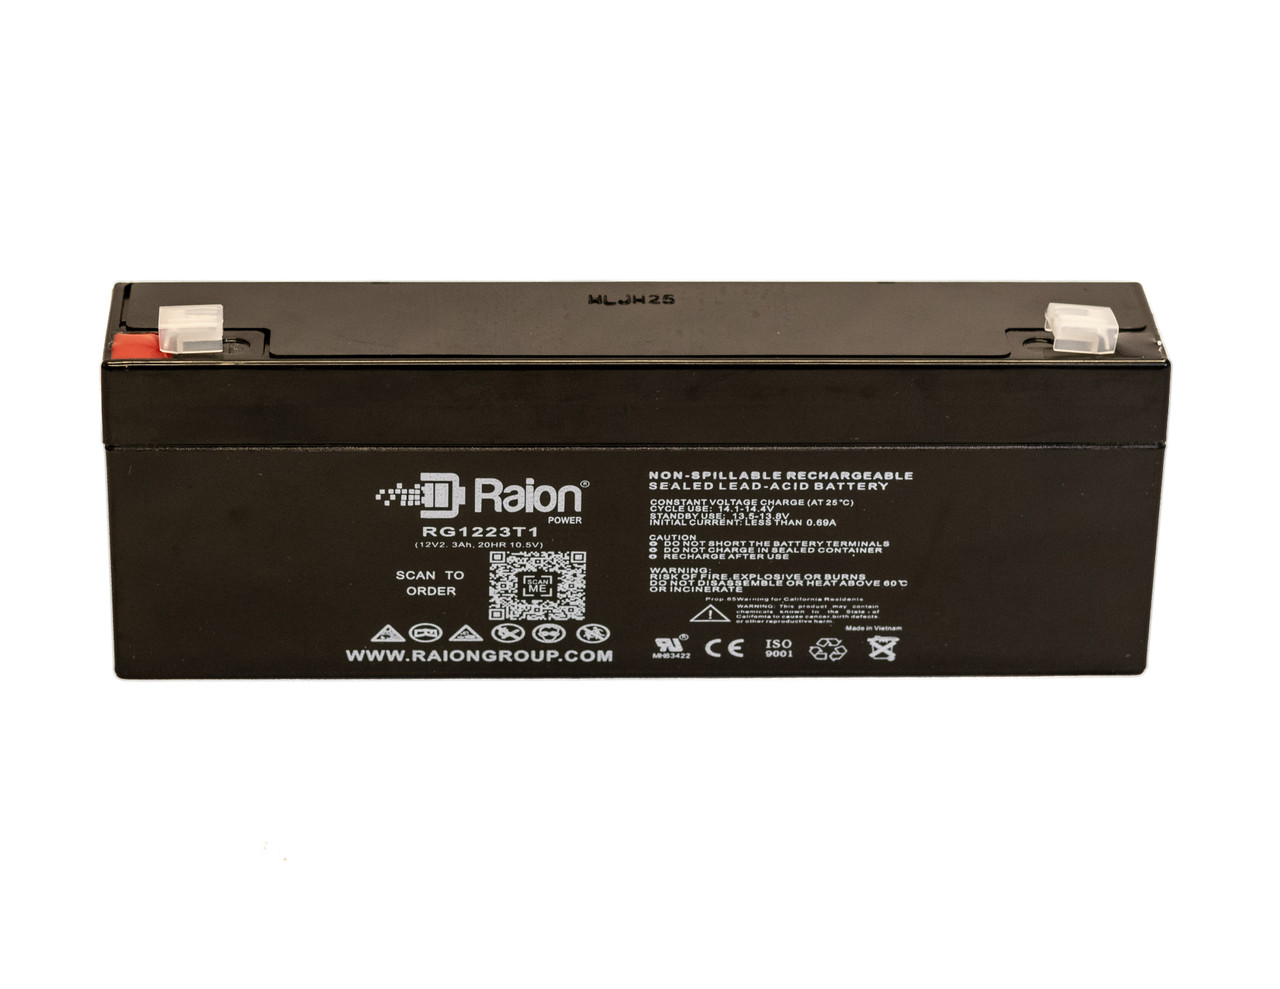 Raion Power 12V 2.3Ah SLA Battery With T1 Terminals For Baxter Healthcare AS5D Auto Syringe